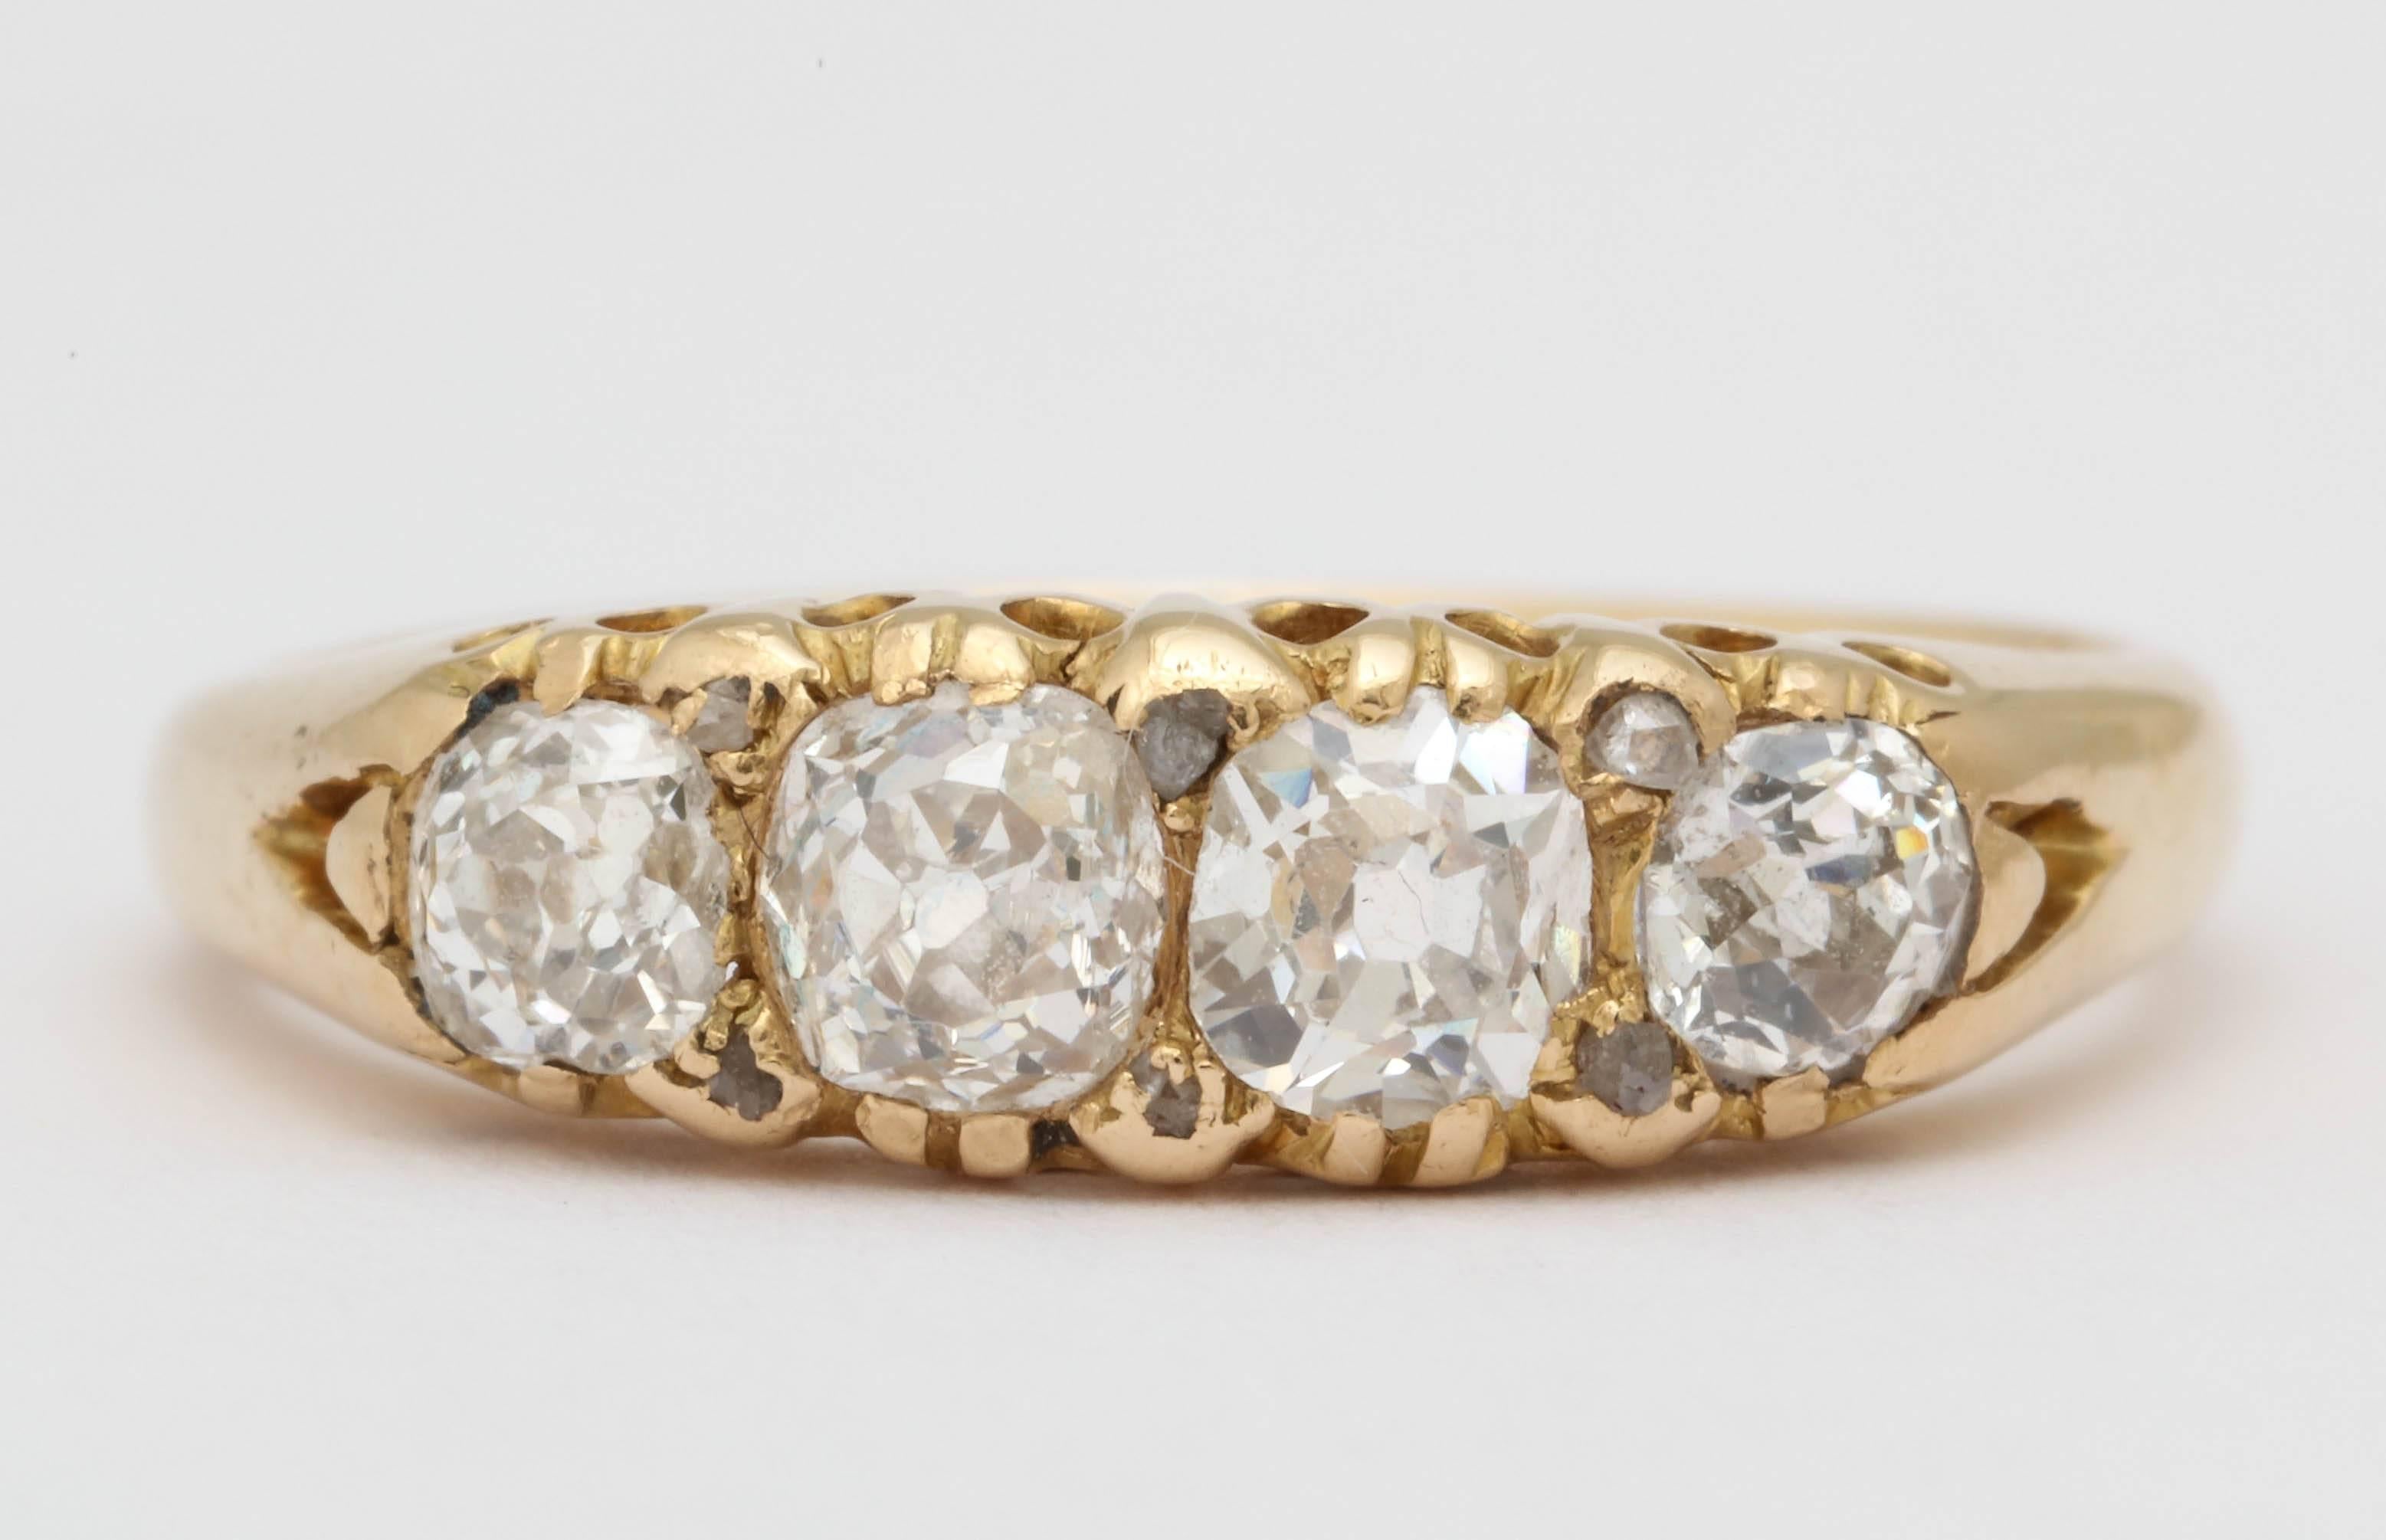 Beautiful chunky old mine cut diamonds are set in 18K yellow gold. Six small rose cut diamonds are set between them. Total carat weight approximately .70. Worn 